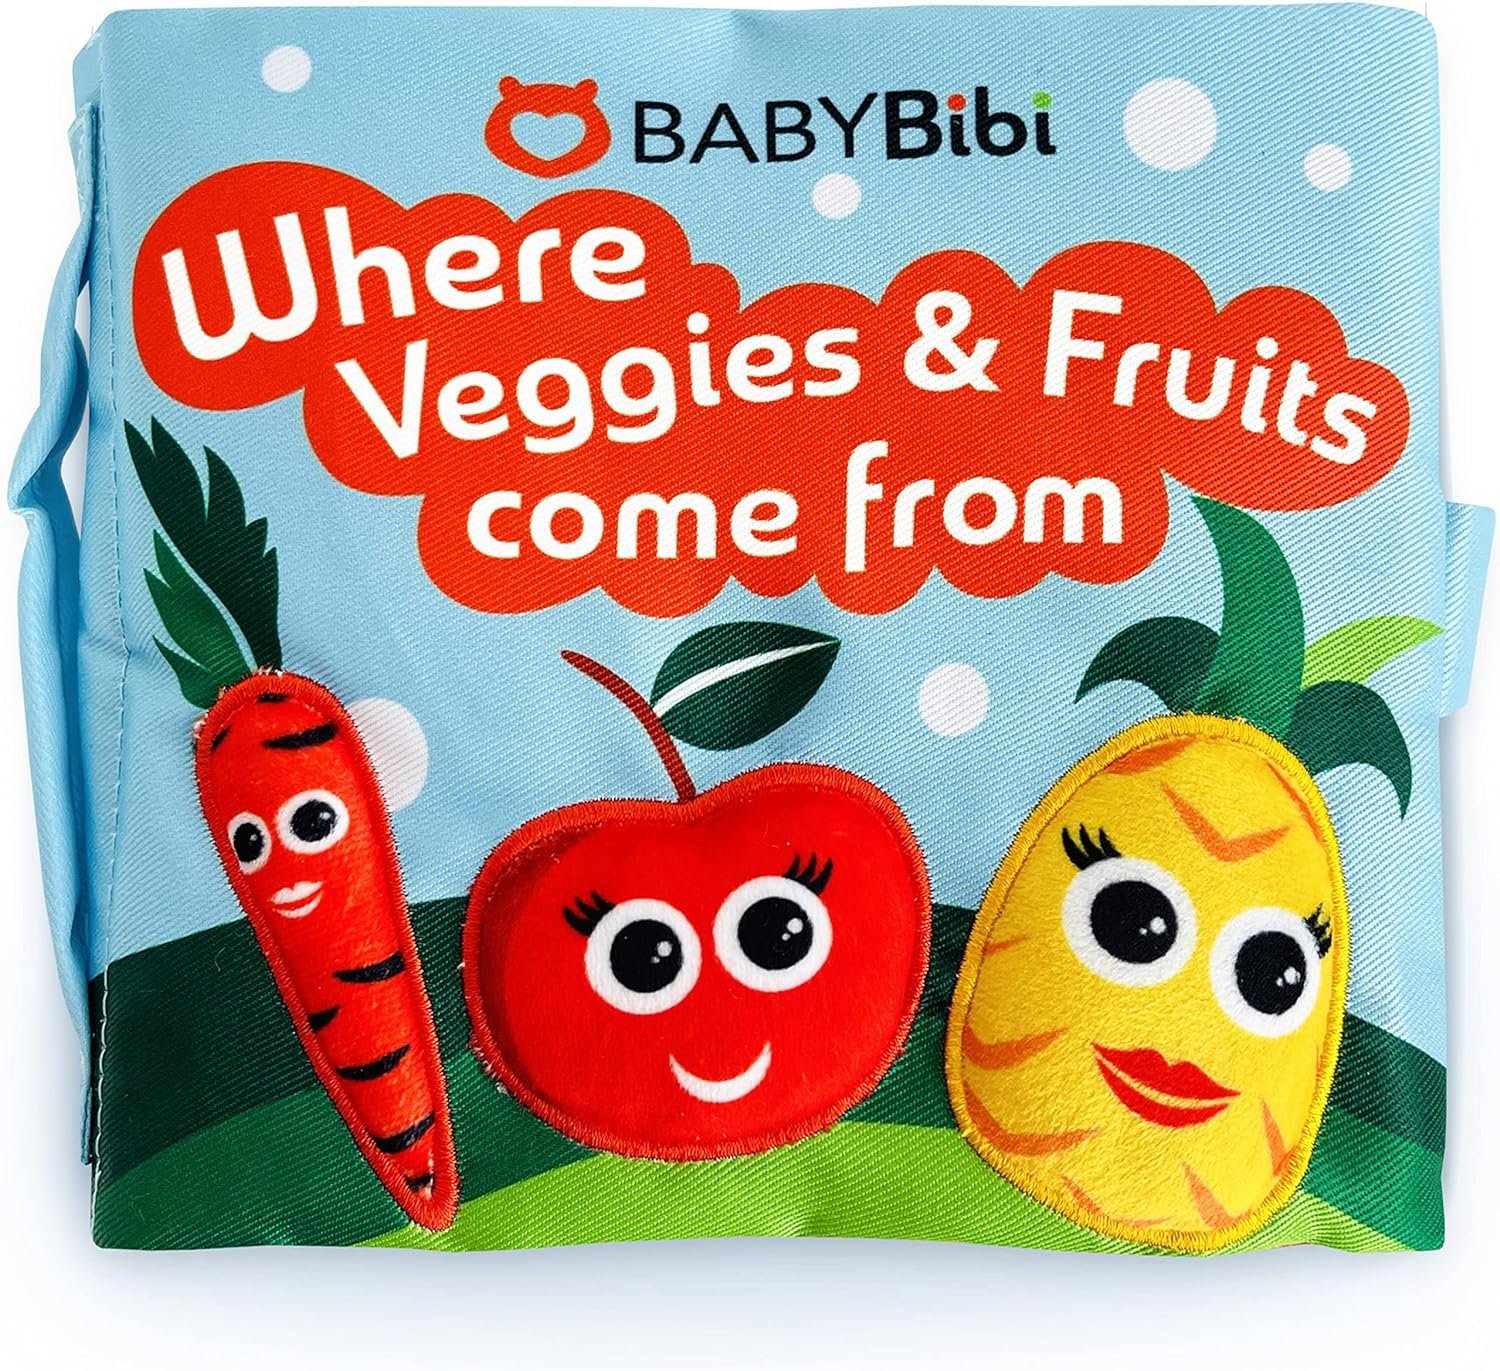 Soft Baby Book, Where Veggies  Fruits Come from. Interactive Teething Infant Book, Touch  Feel, Crinkle Cloth Book for Babies 3 Months+